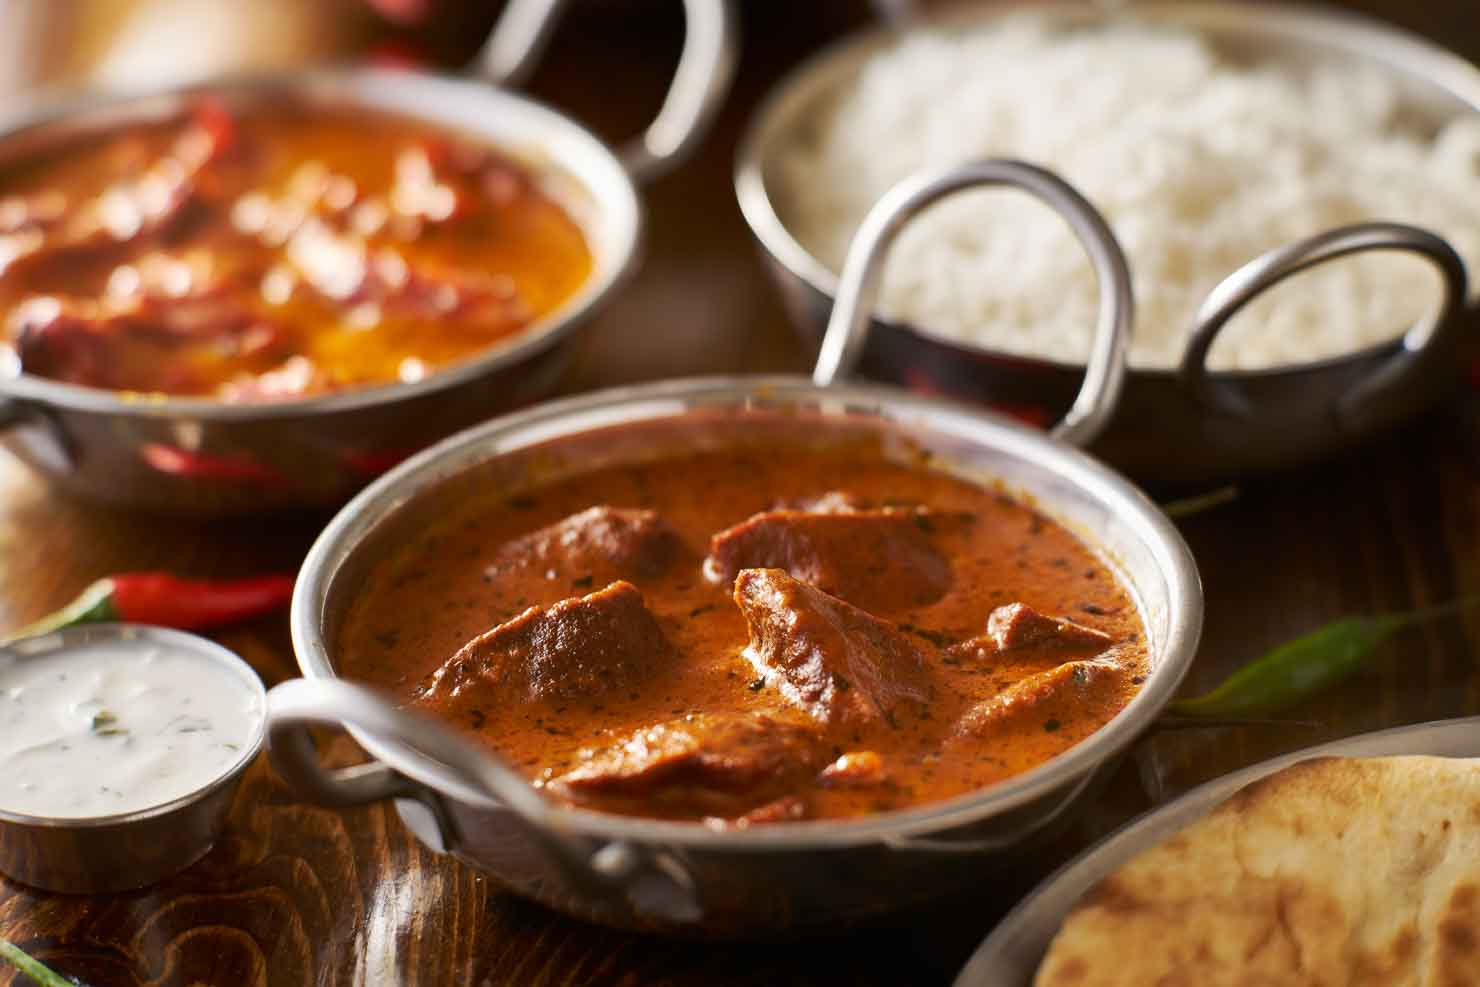 Rogan Josh - Traditional Indian cuisine featuring tender meat cooked in aromatic spices.